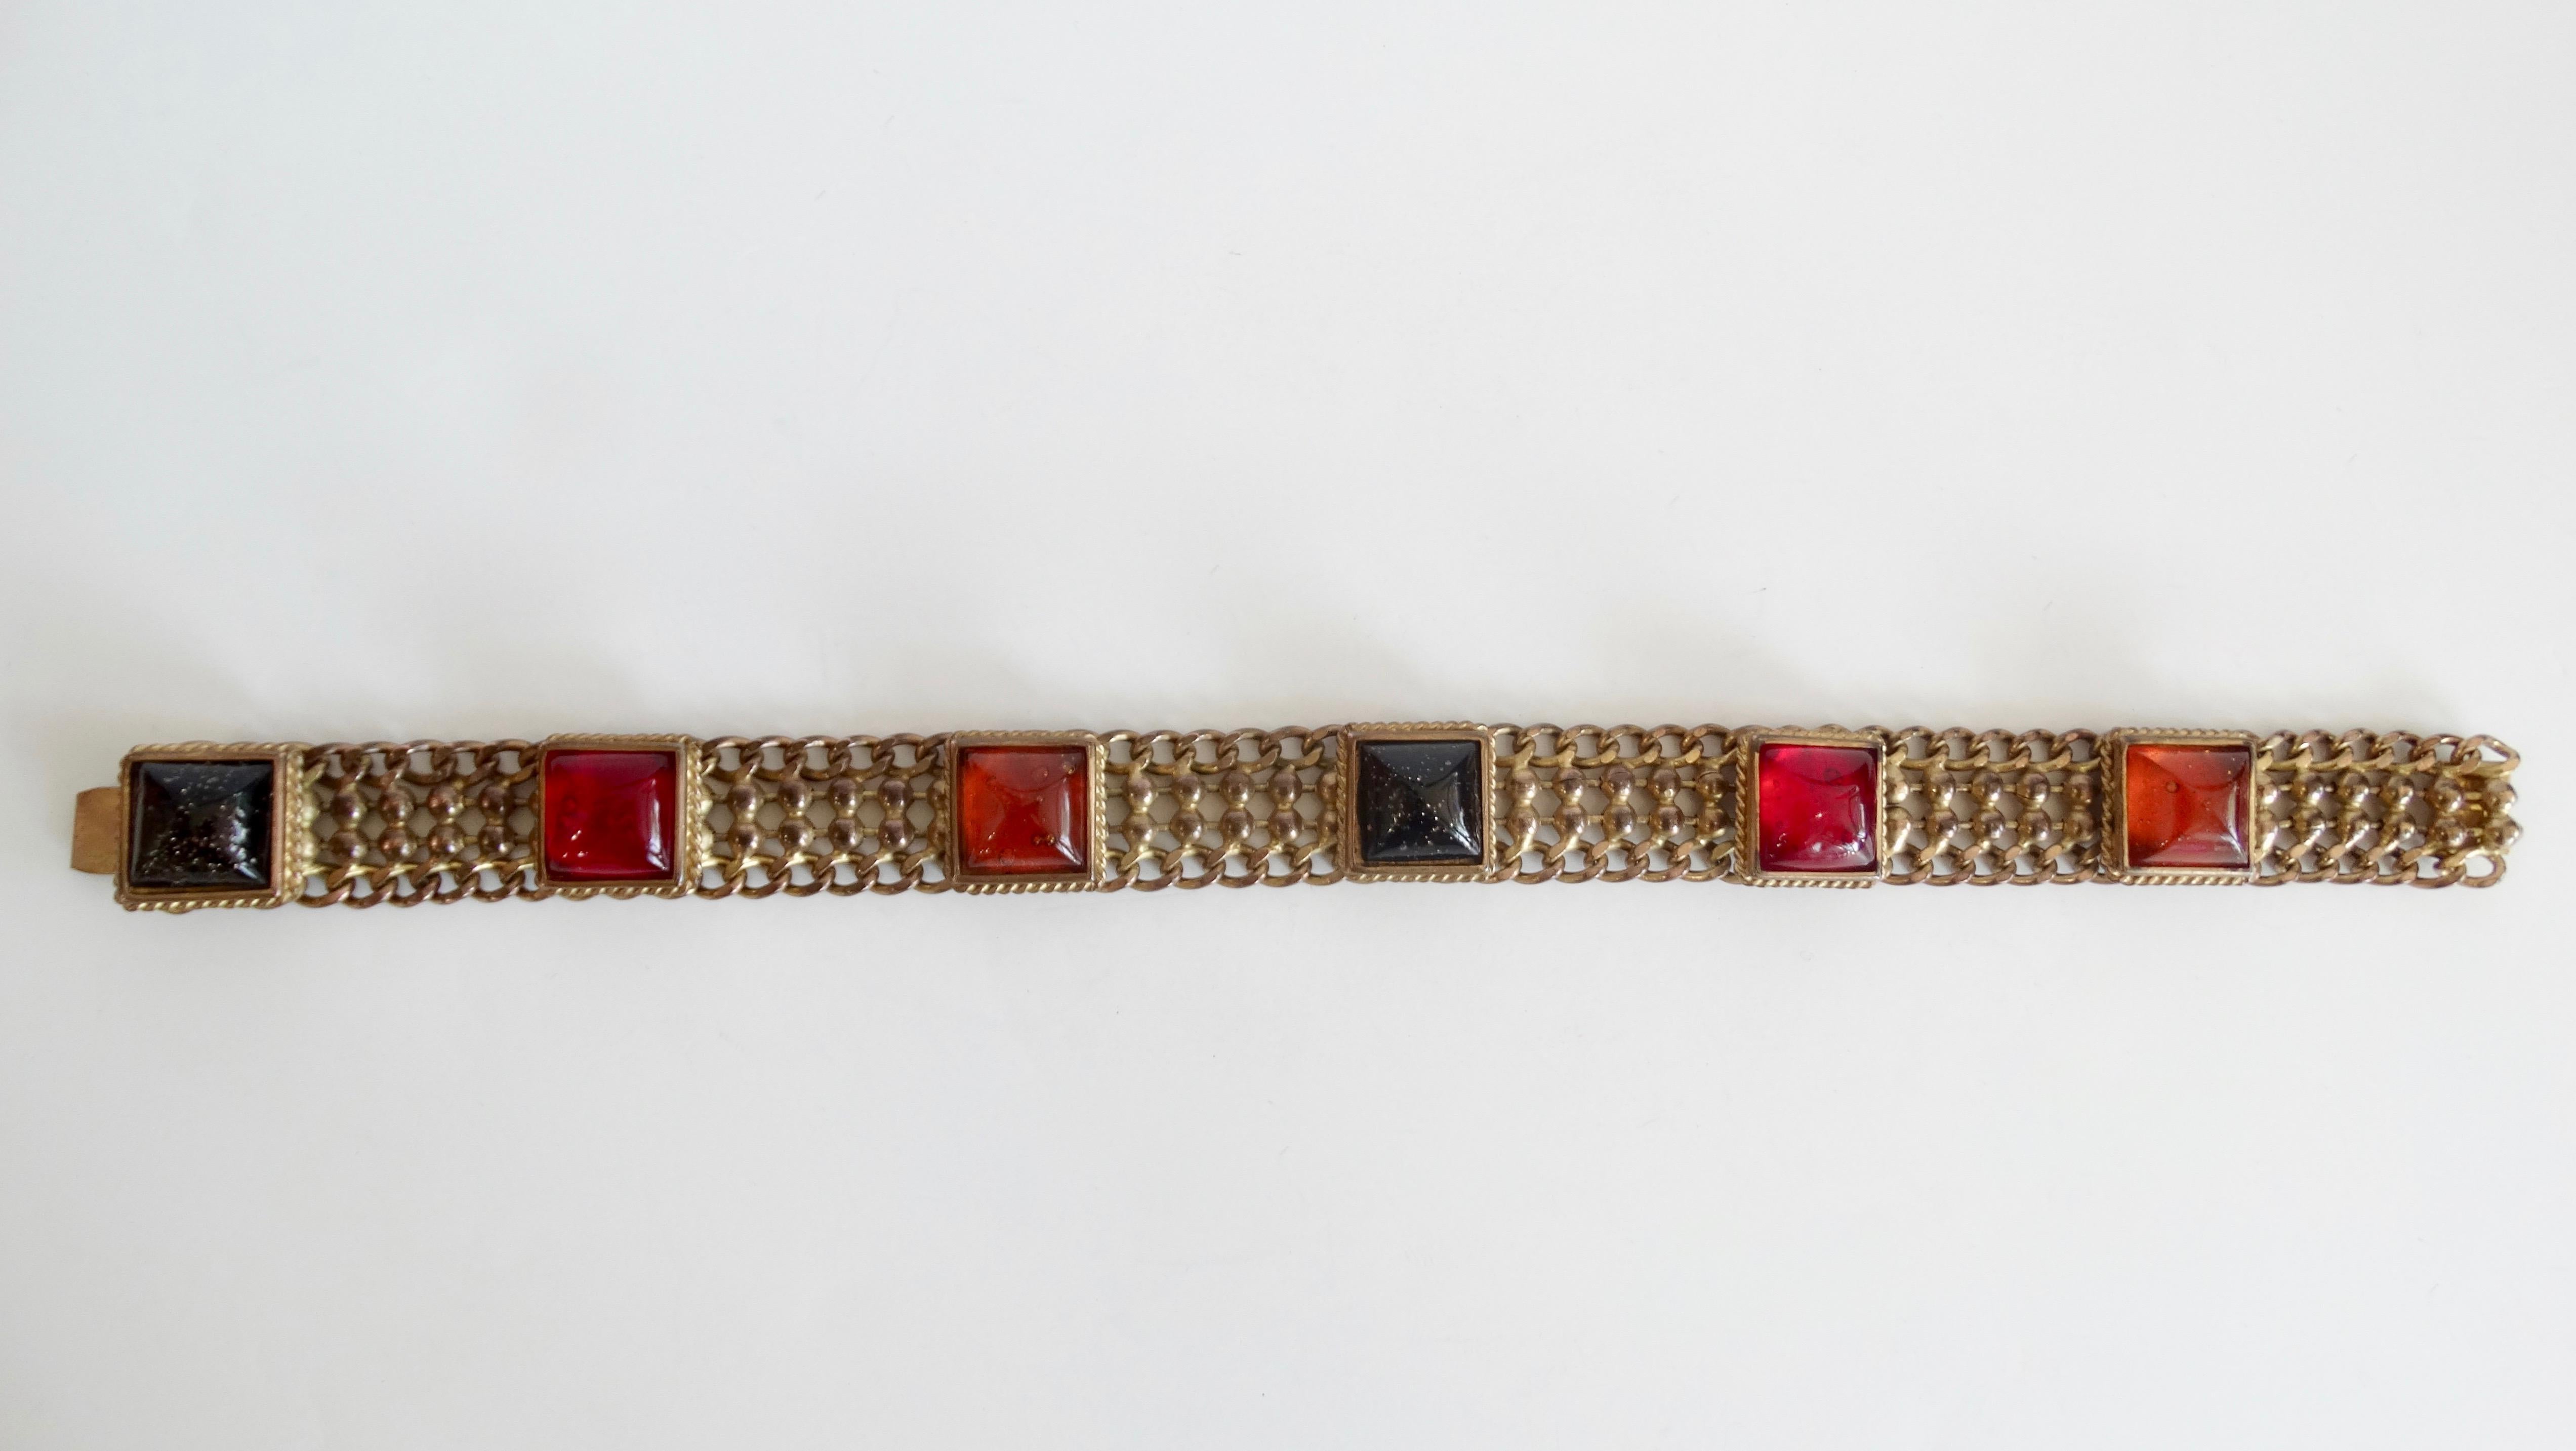 Spice up your jewelry collection with this amazing Isabel Canovas choker! Circa 1980s, this multi chain brass choker features square Gripoix gems, a poured glass technique,  in gold speckled black, orange and red. Includes a box clasp closure. The